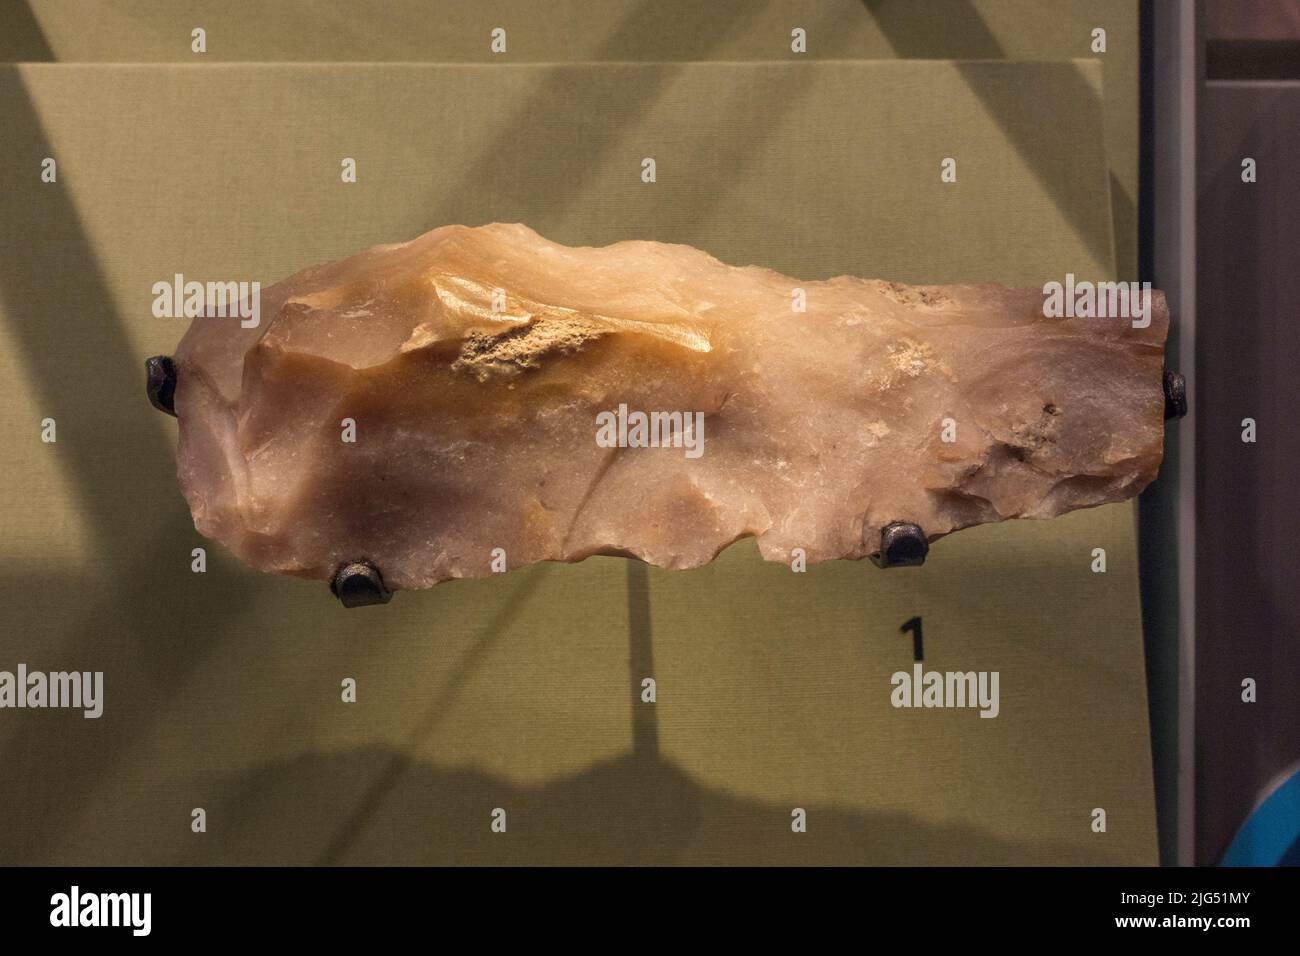 A stone pick originally from Carnac, France (c.10,000-4,500 BC) but discovered in England on display in the UK. Stock Photo